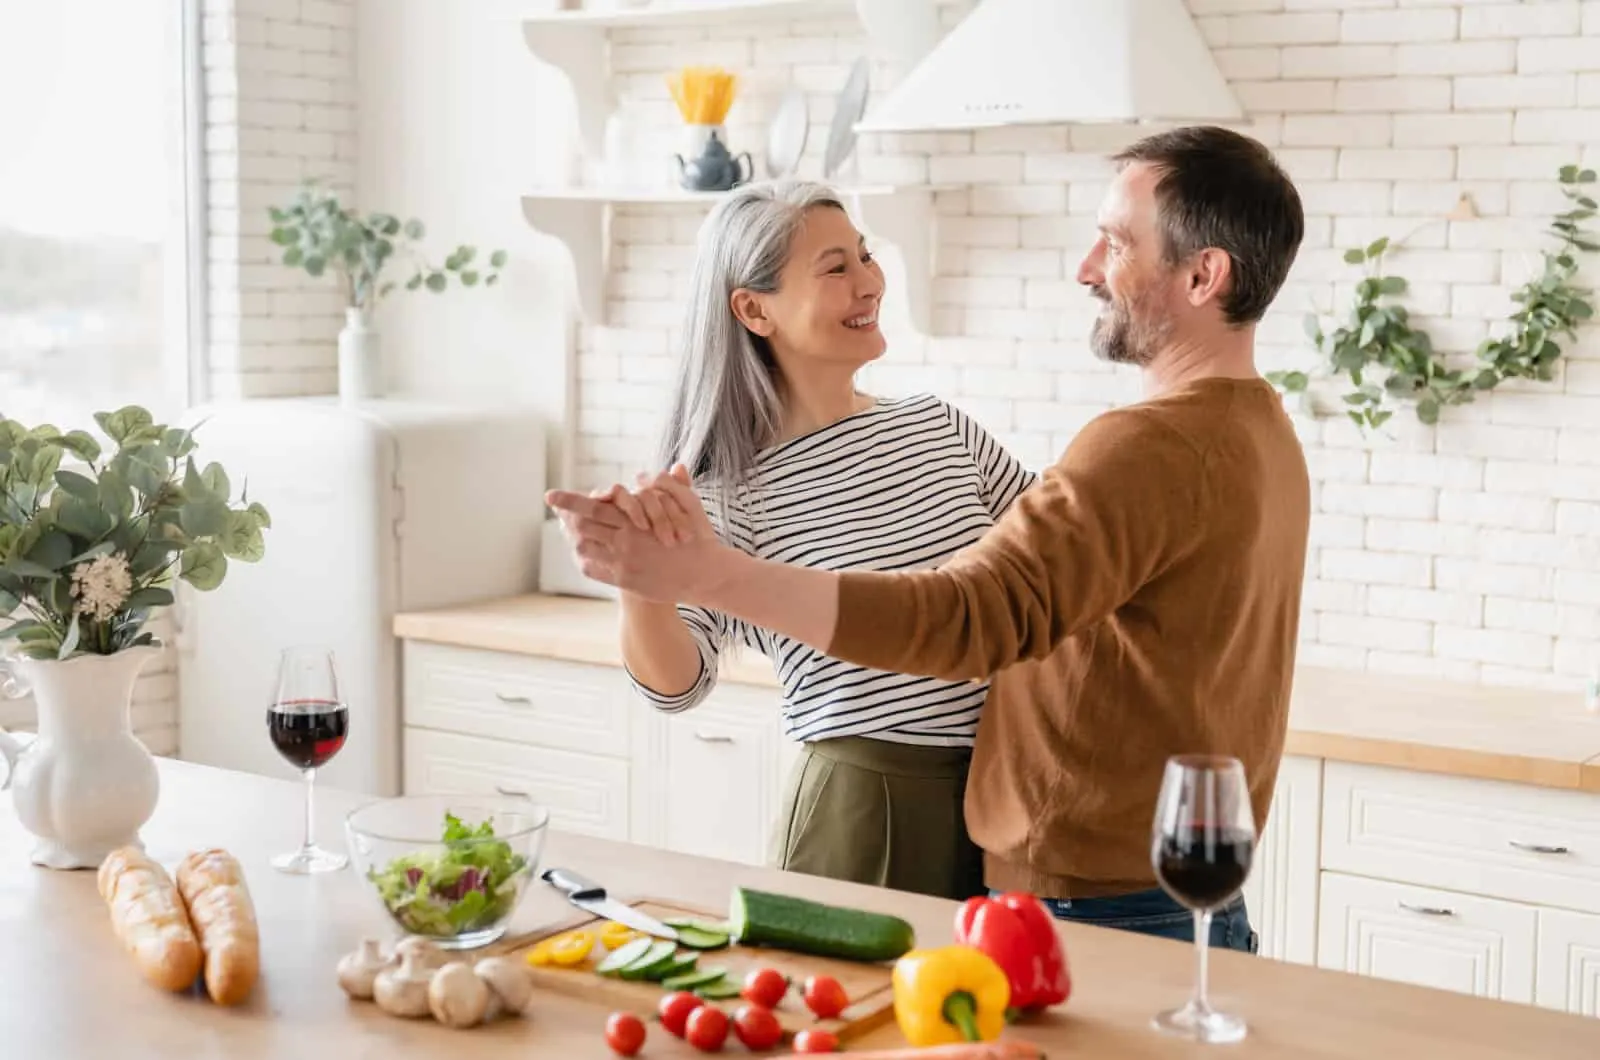 woman dancing with a man in the kitchen enjoying his company